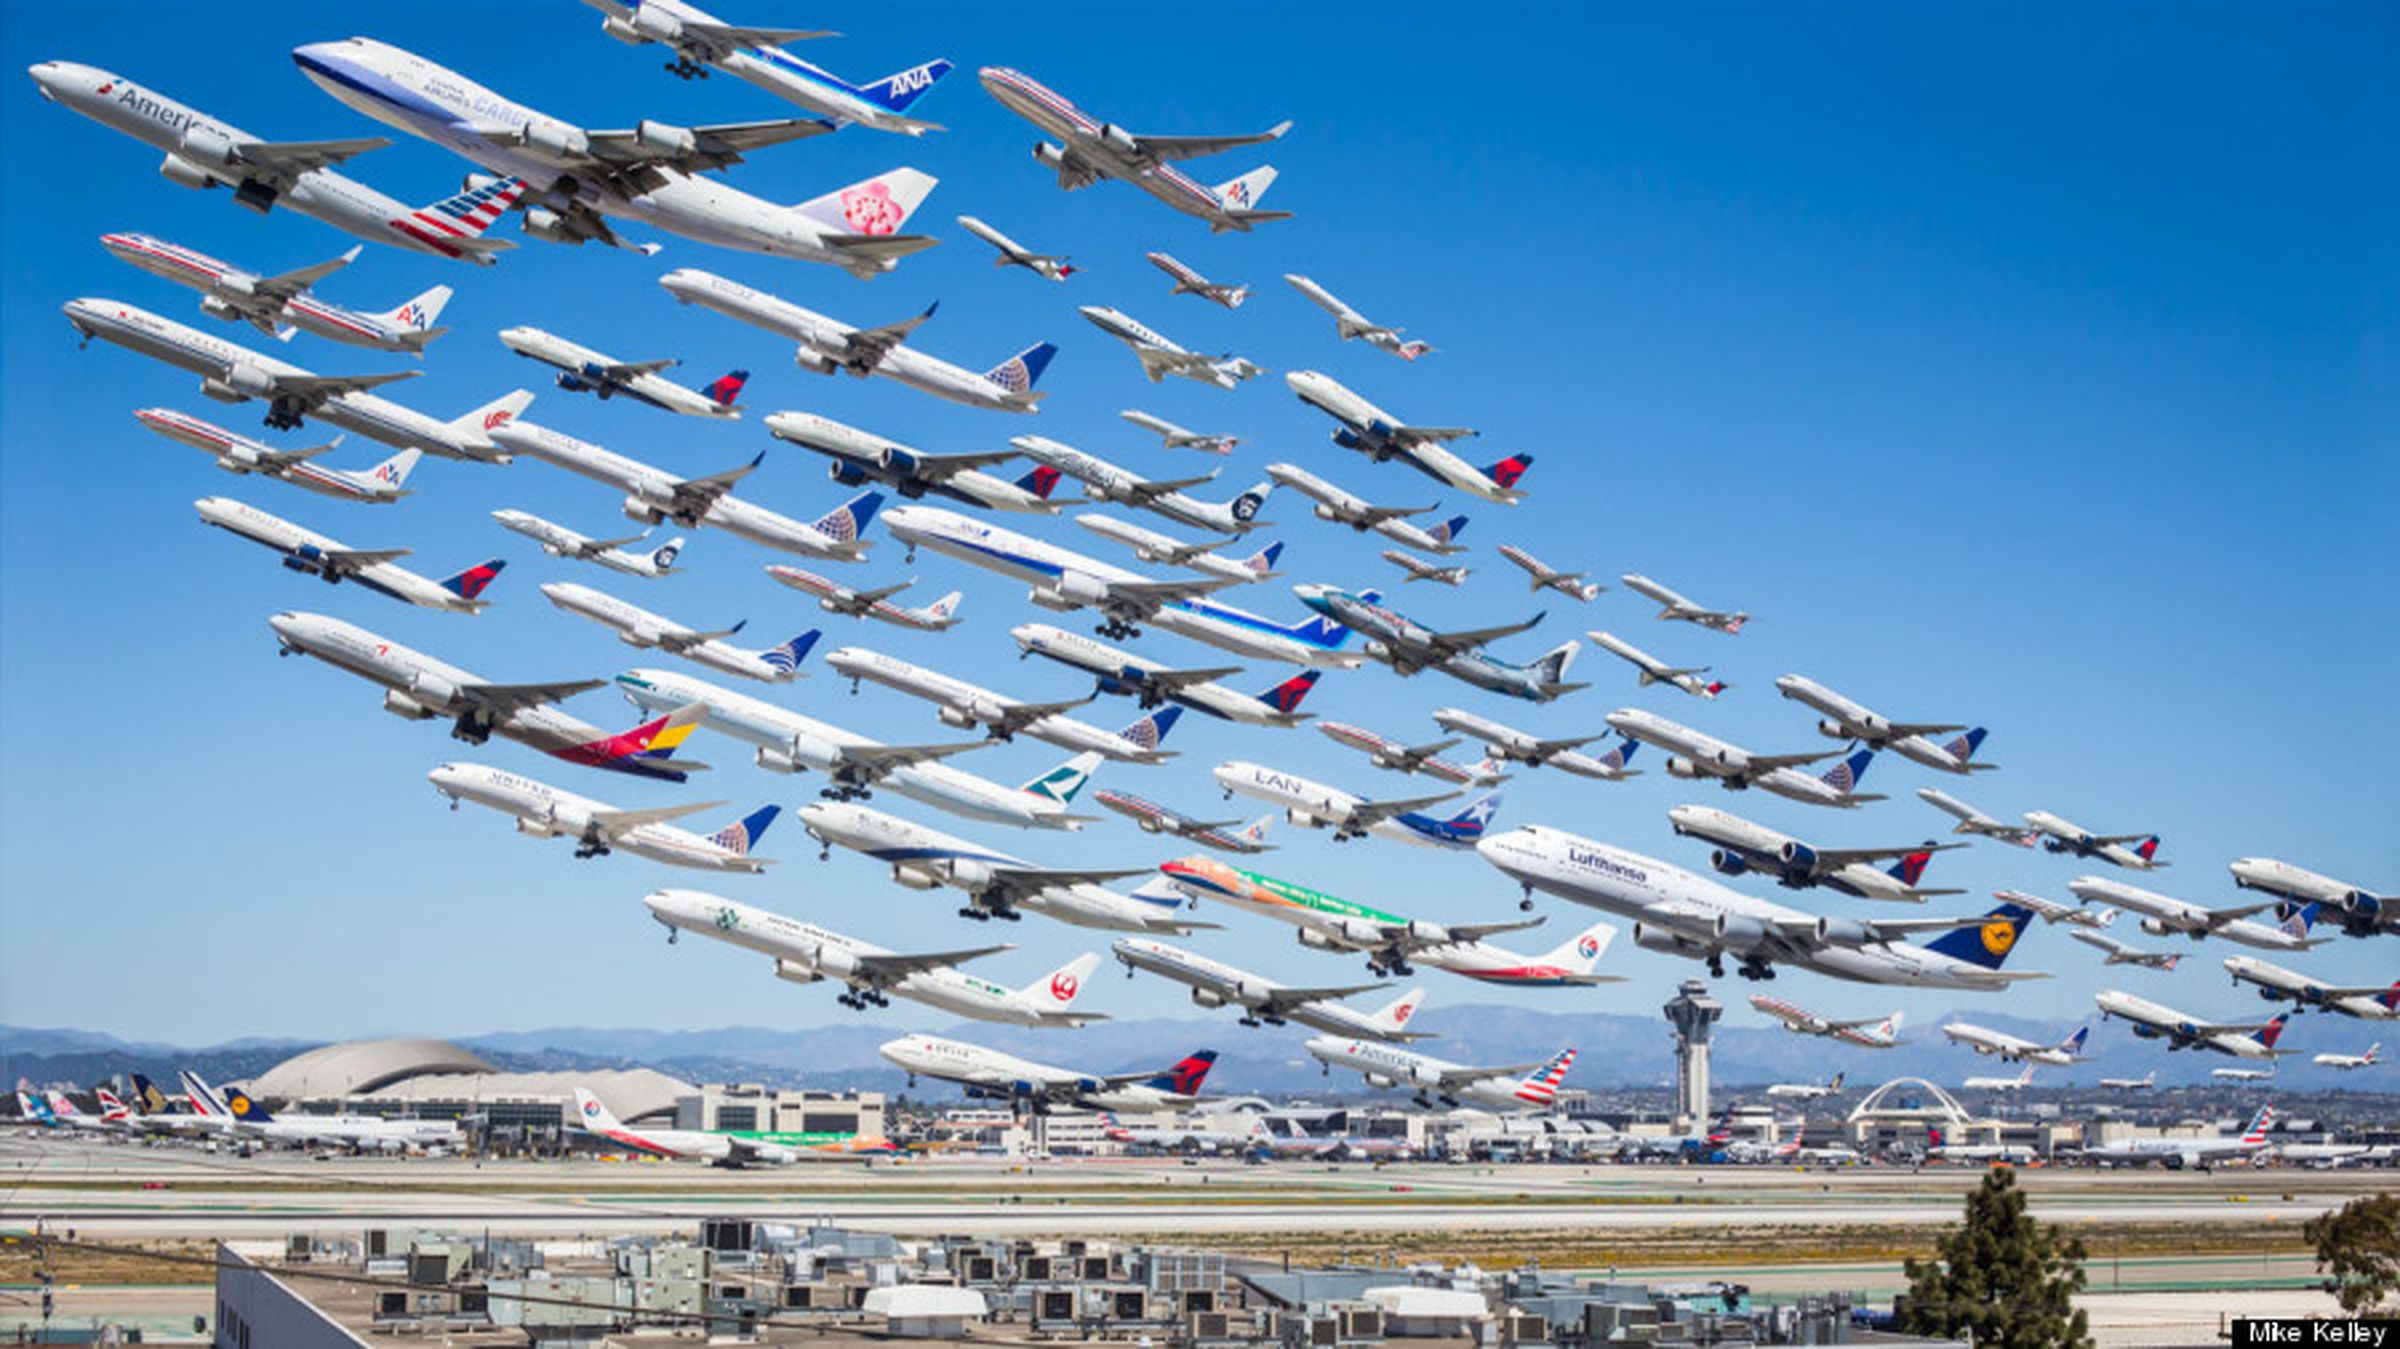 Composite photo of every plane that took off from LAX over the course of a day.